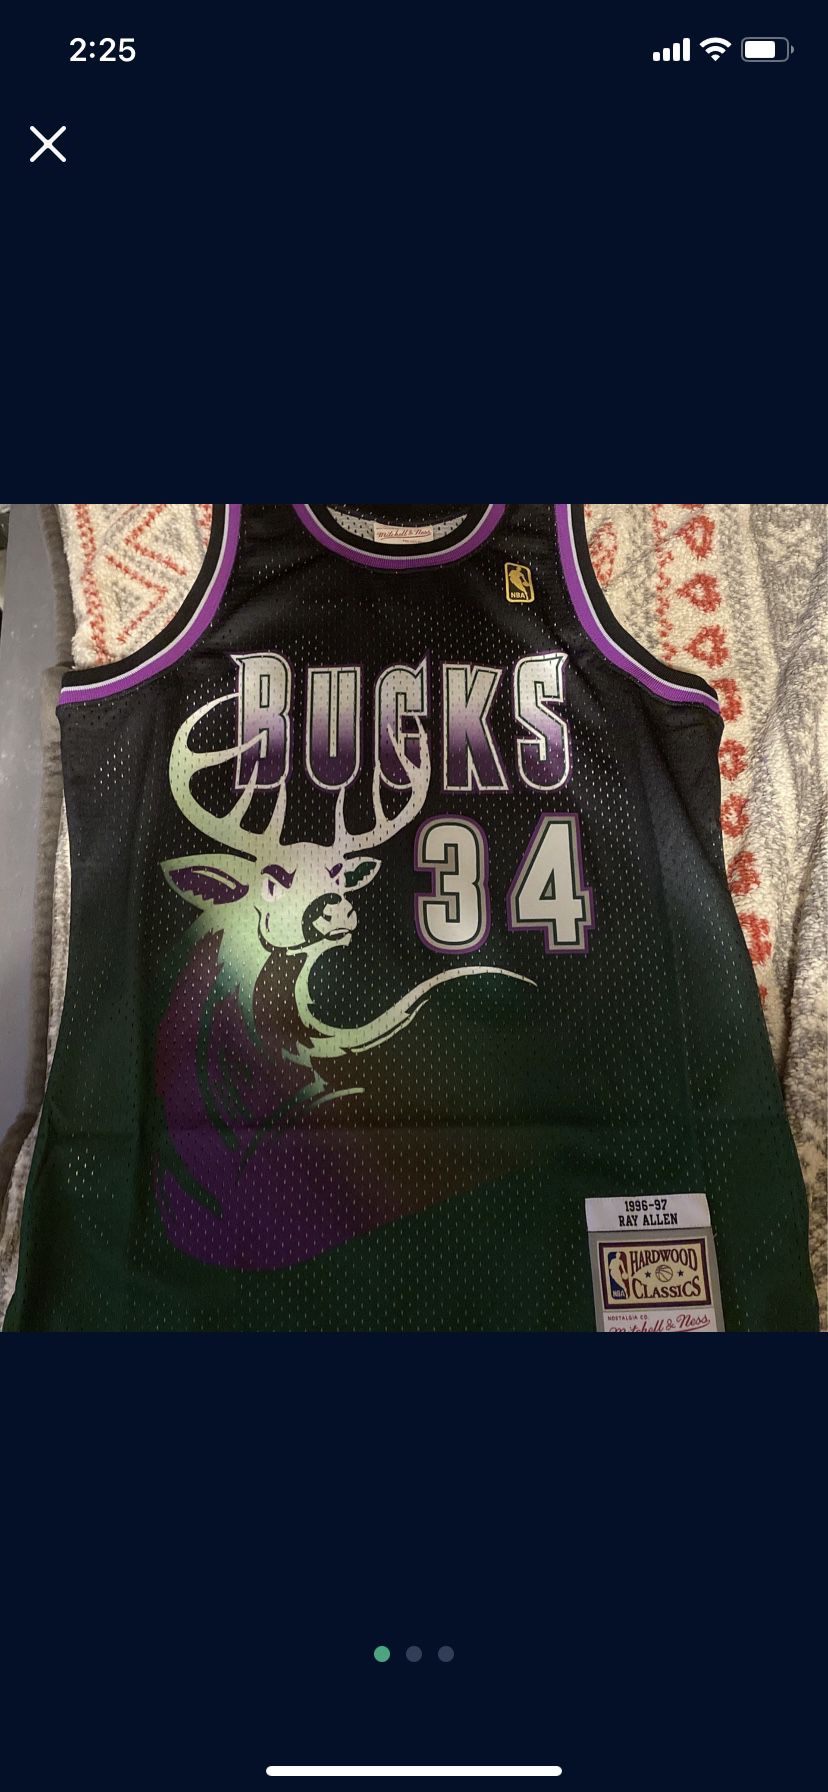 Ray Allen Milwaukee Bucks Mitchell and Ness Hardwood Classic throwback  Jersey 44 for Sale in Perth Amboy, NJ - OfferUp